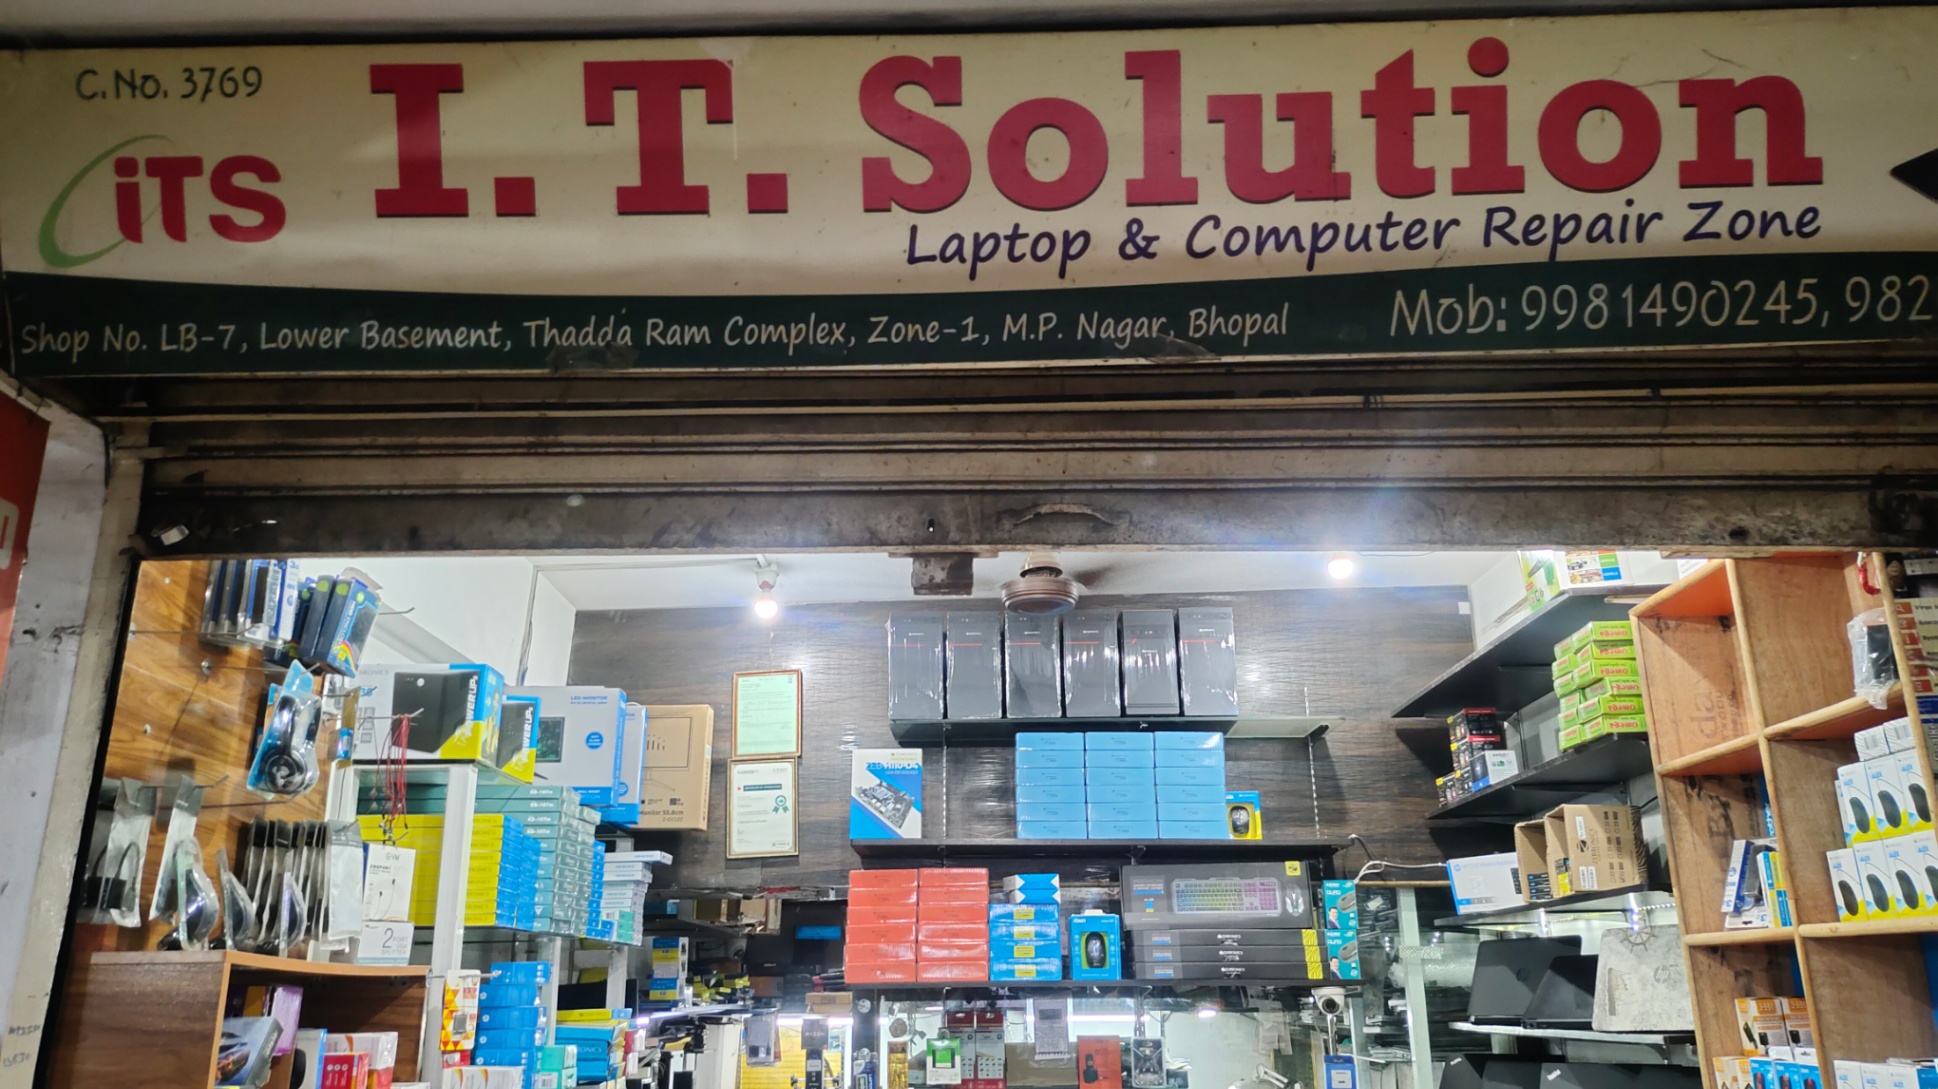 Mobile/ Computer/ Electronics repair; Exp: More than 10 year